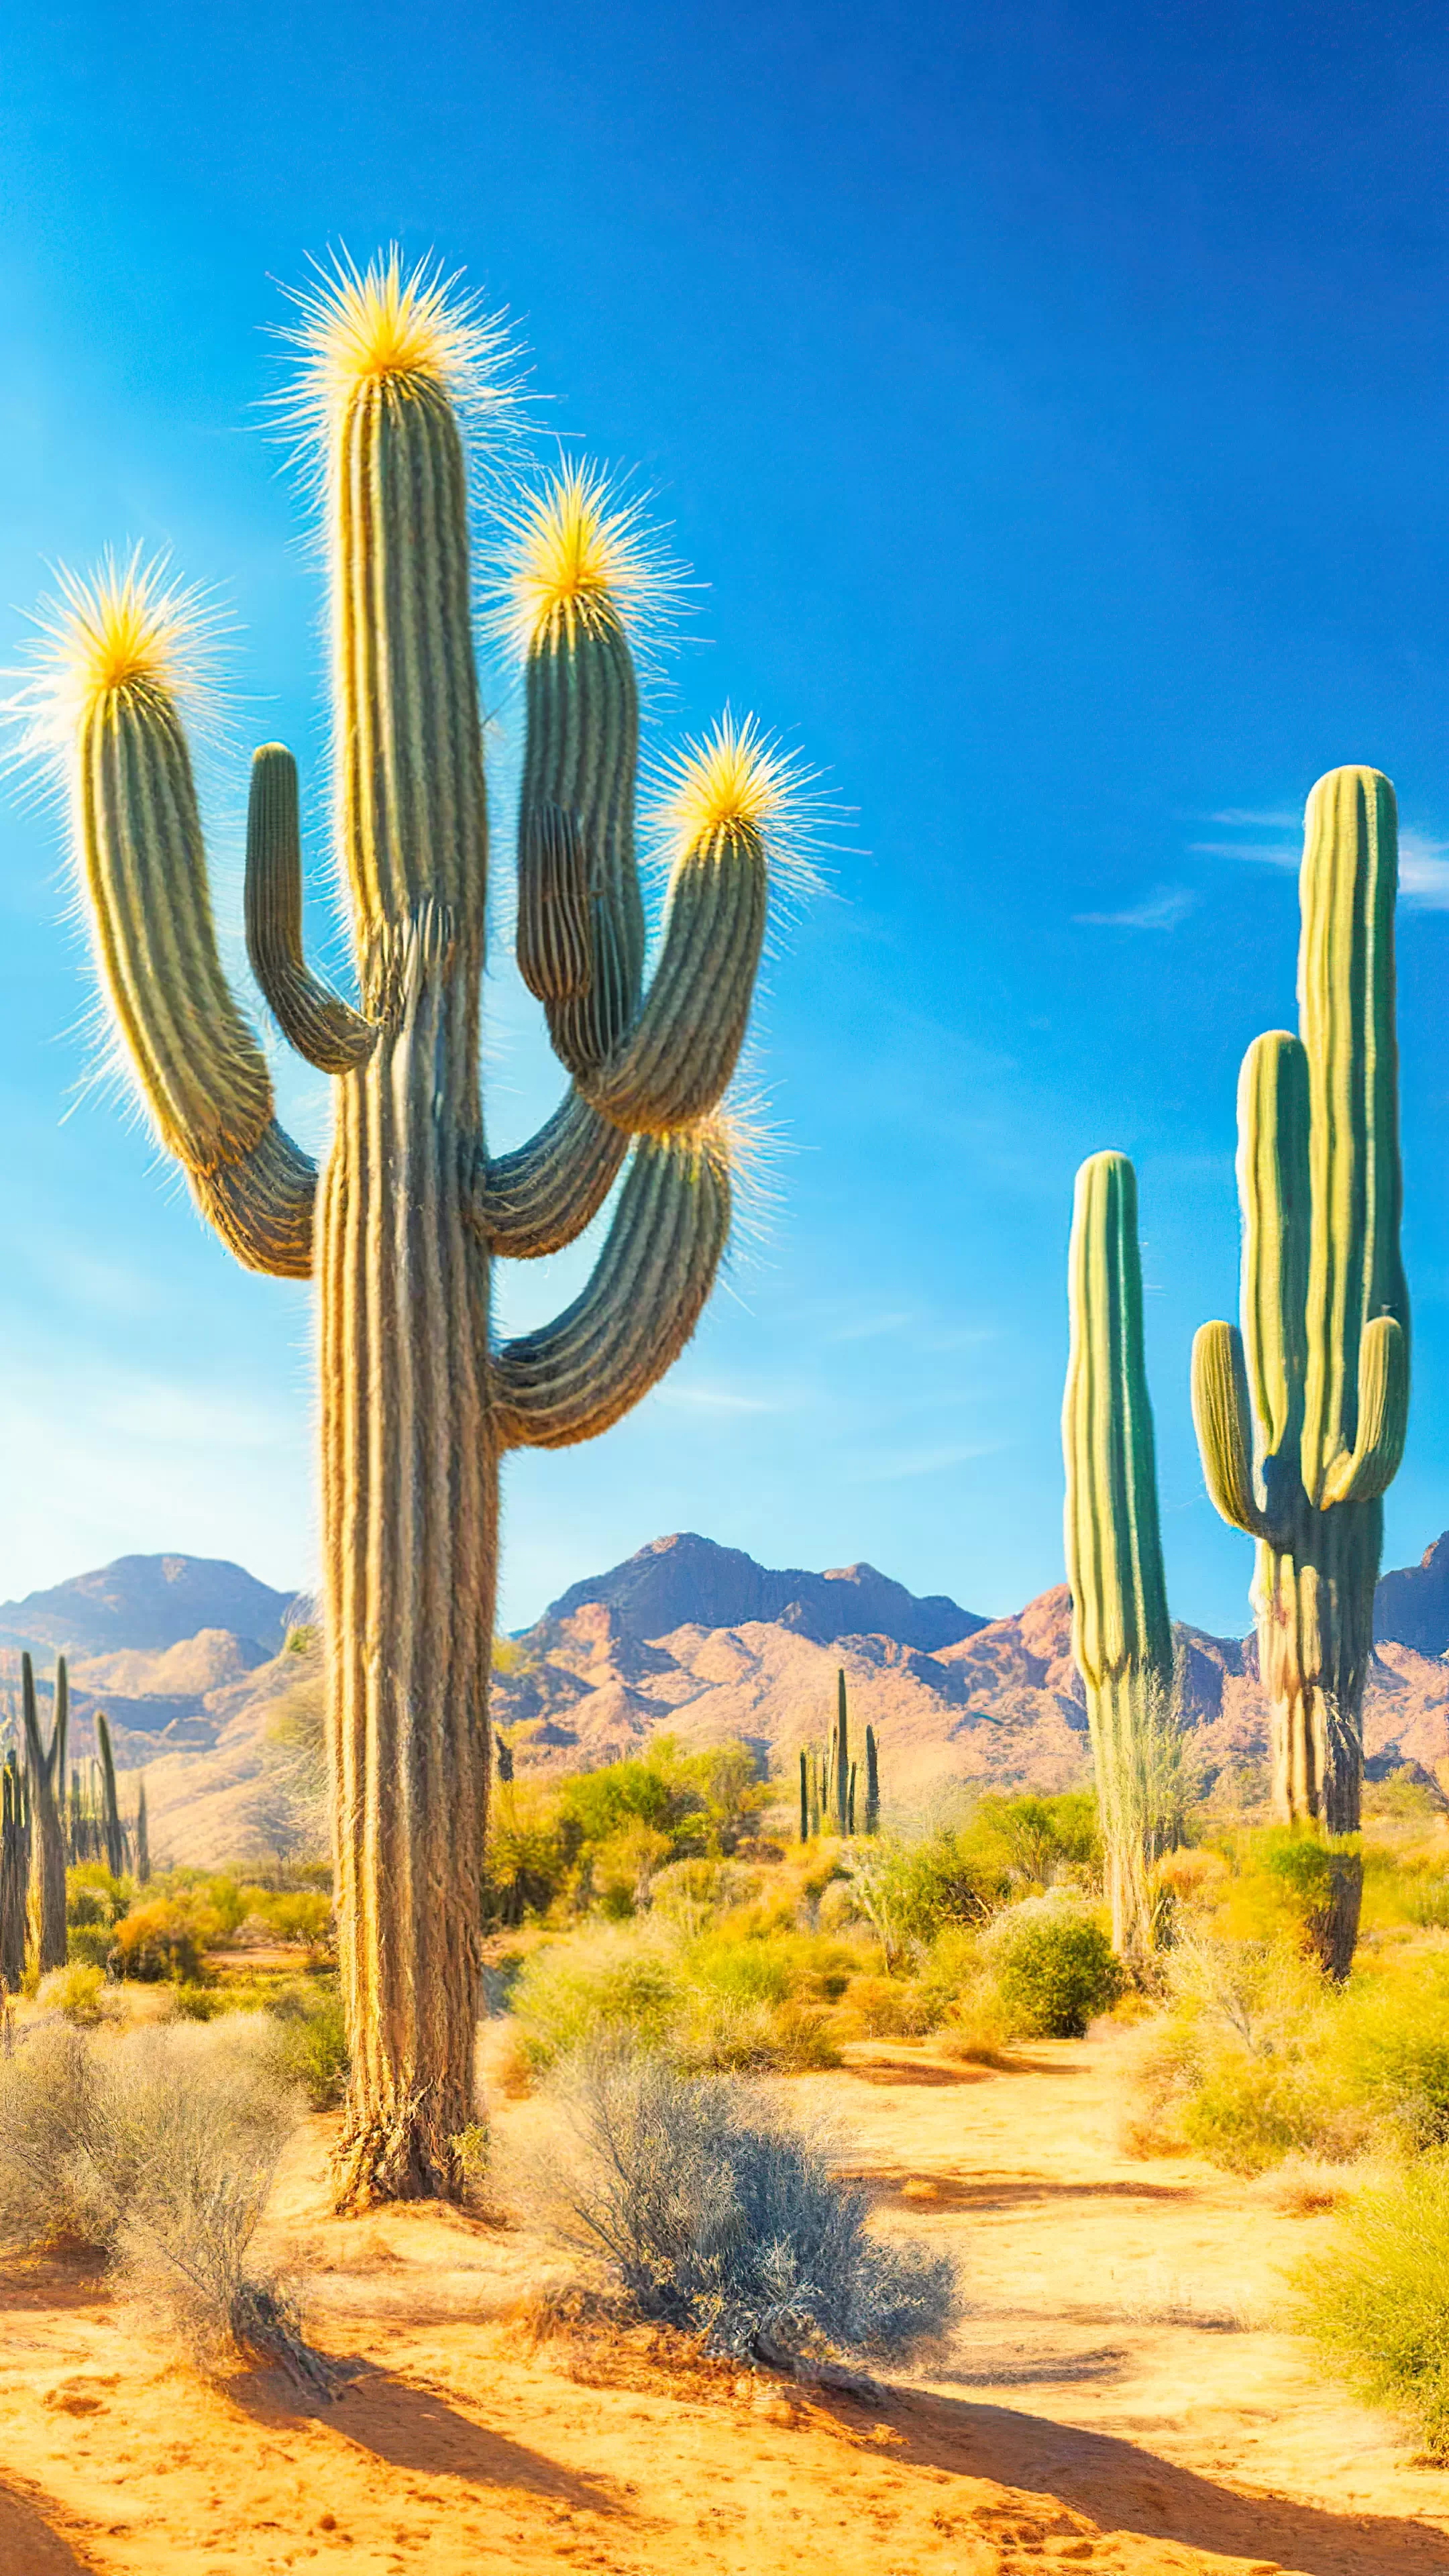 Discover the vastness of a desert landscape dotted with saguaro cacti under blue skies with our 1080p nature wallpaper, and let your device become a portal to the rugged beauty of the wilderness.